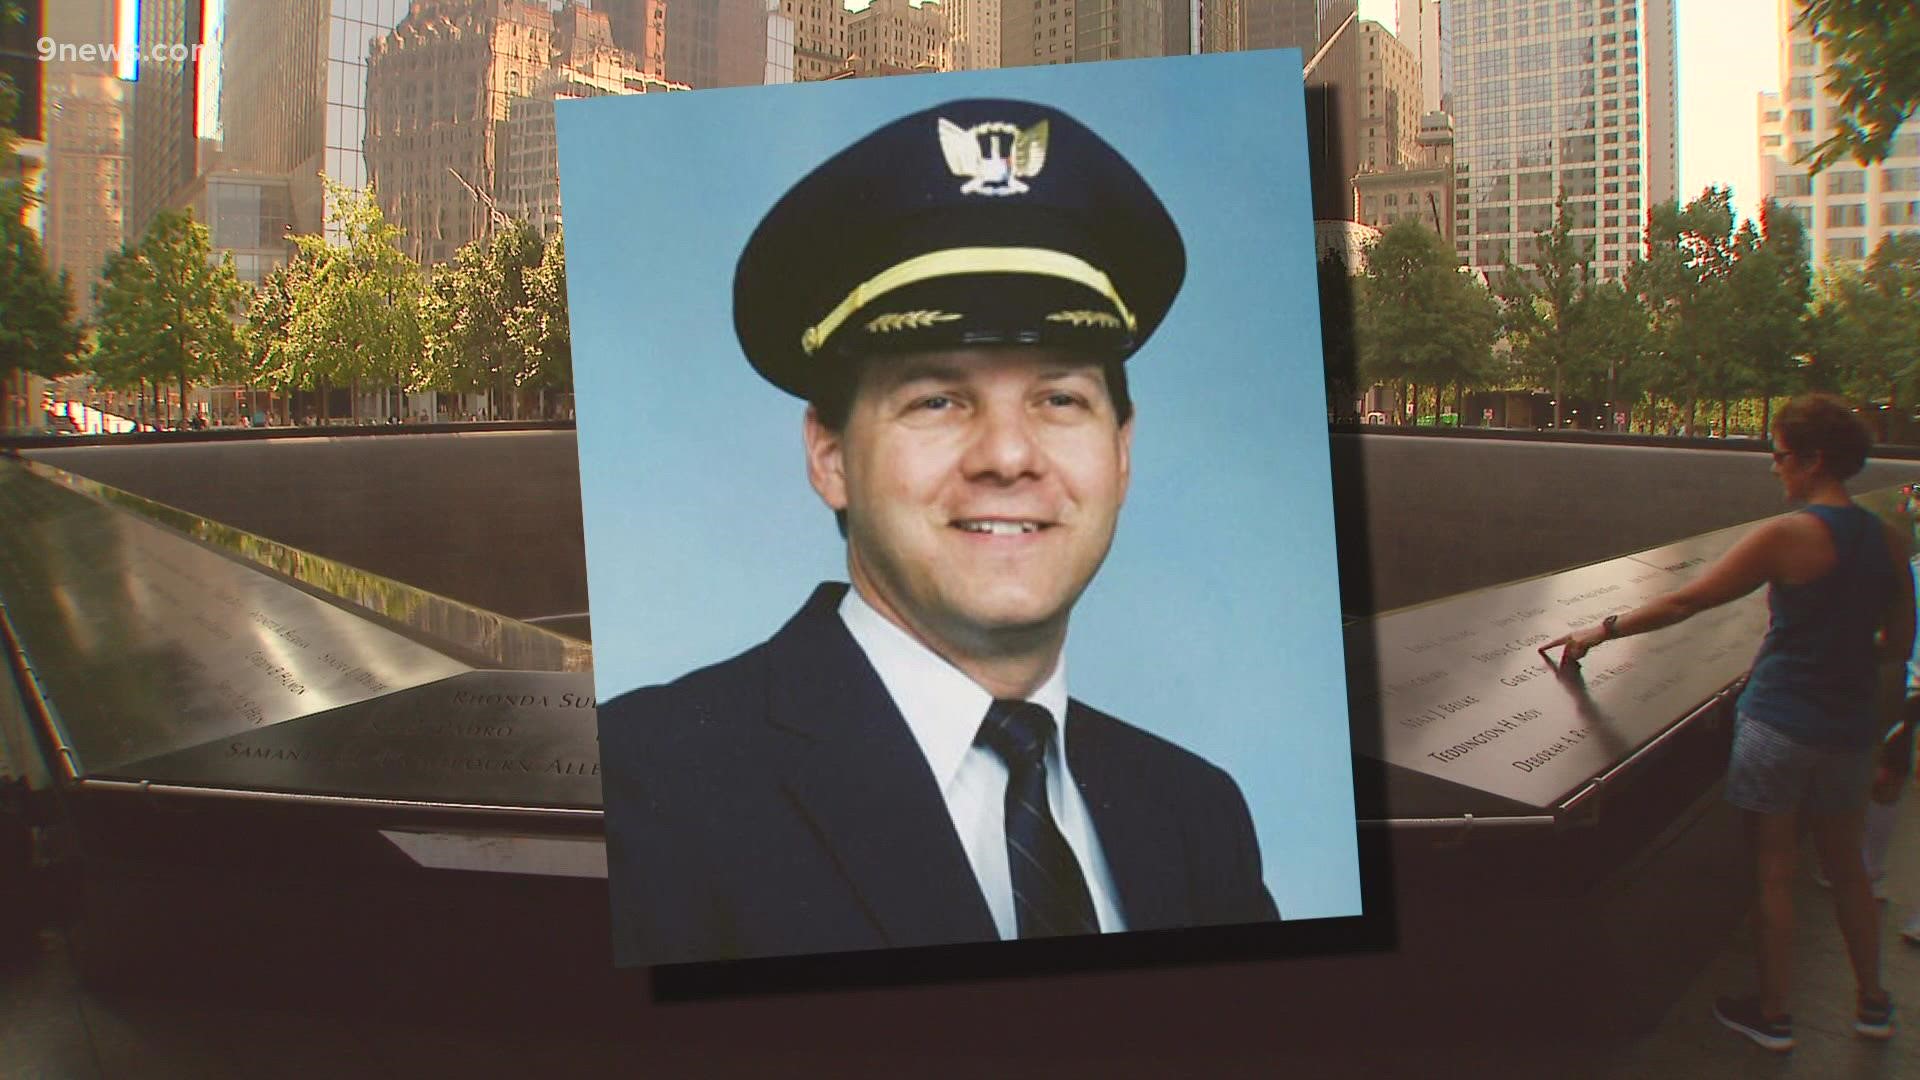 Capt. Jason Dahl of Colorado was the pilot of United Airlines Flight 93, which crashed in a field in Pennsylvania on Sept. 11, 2001.